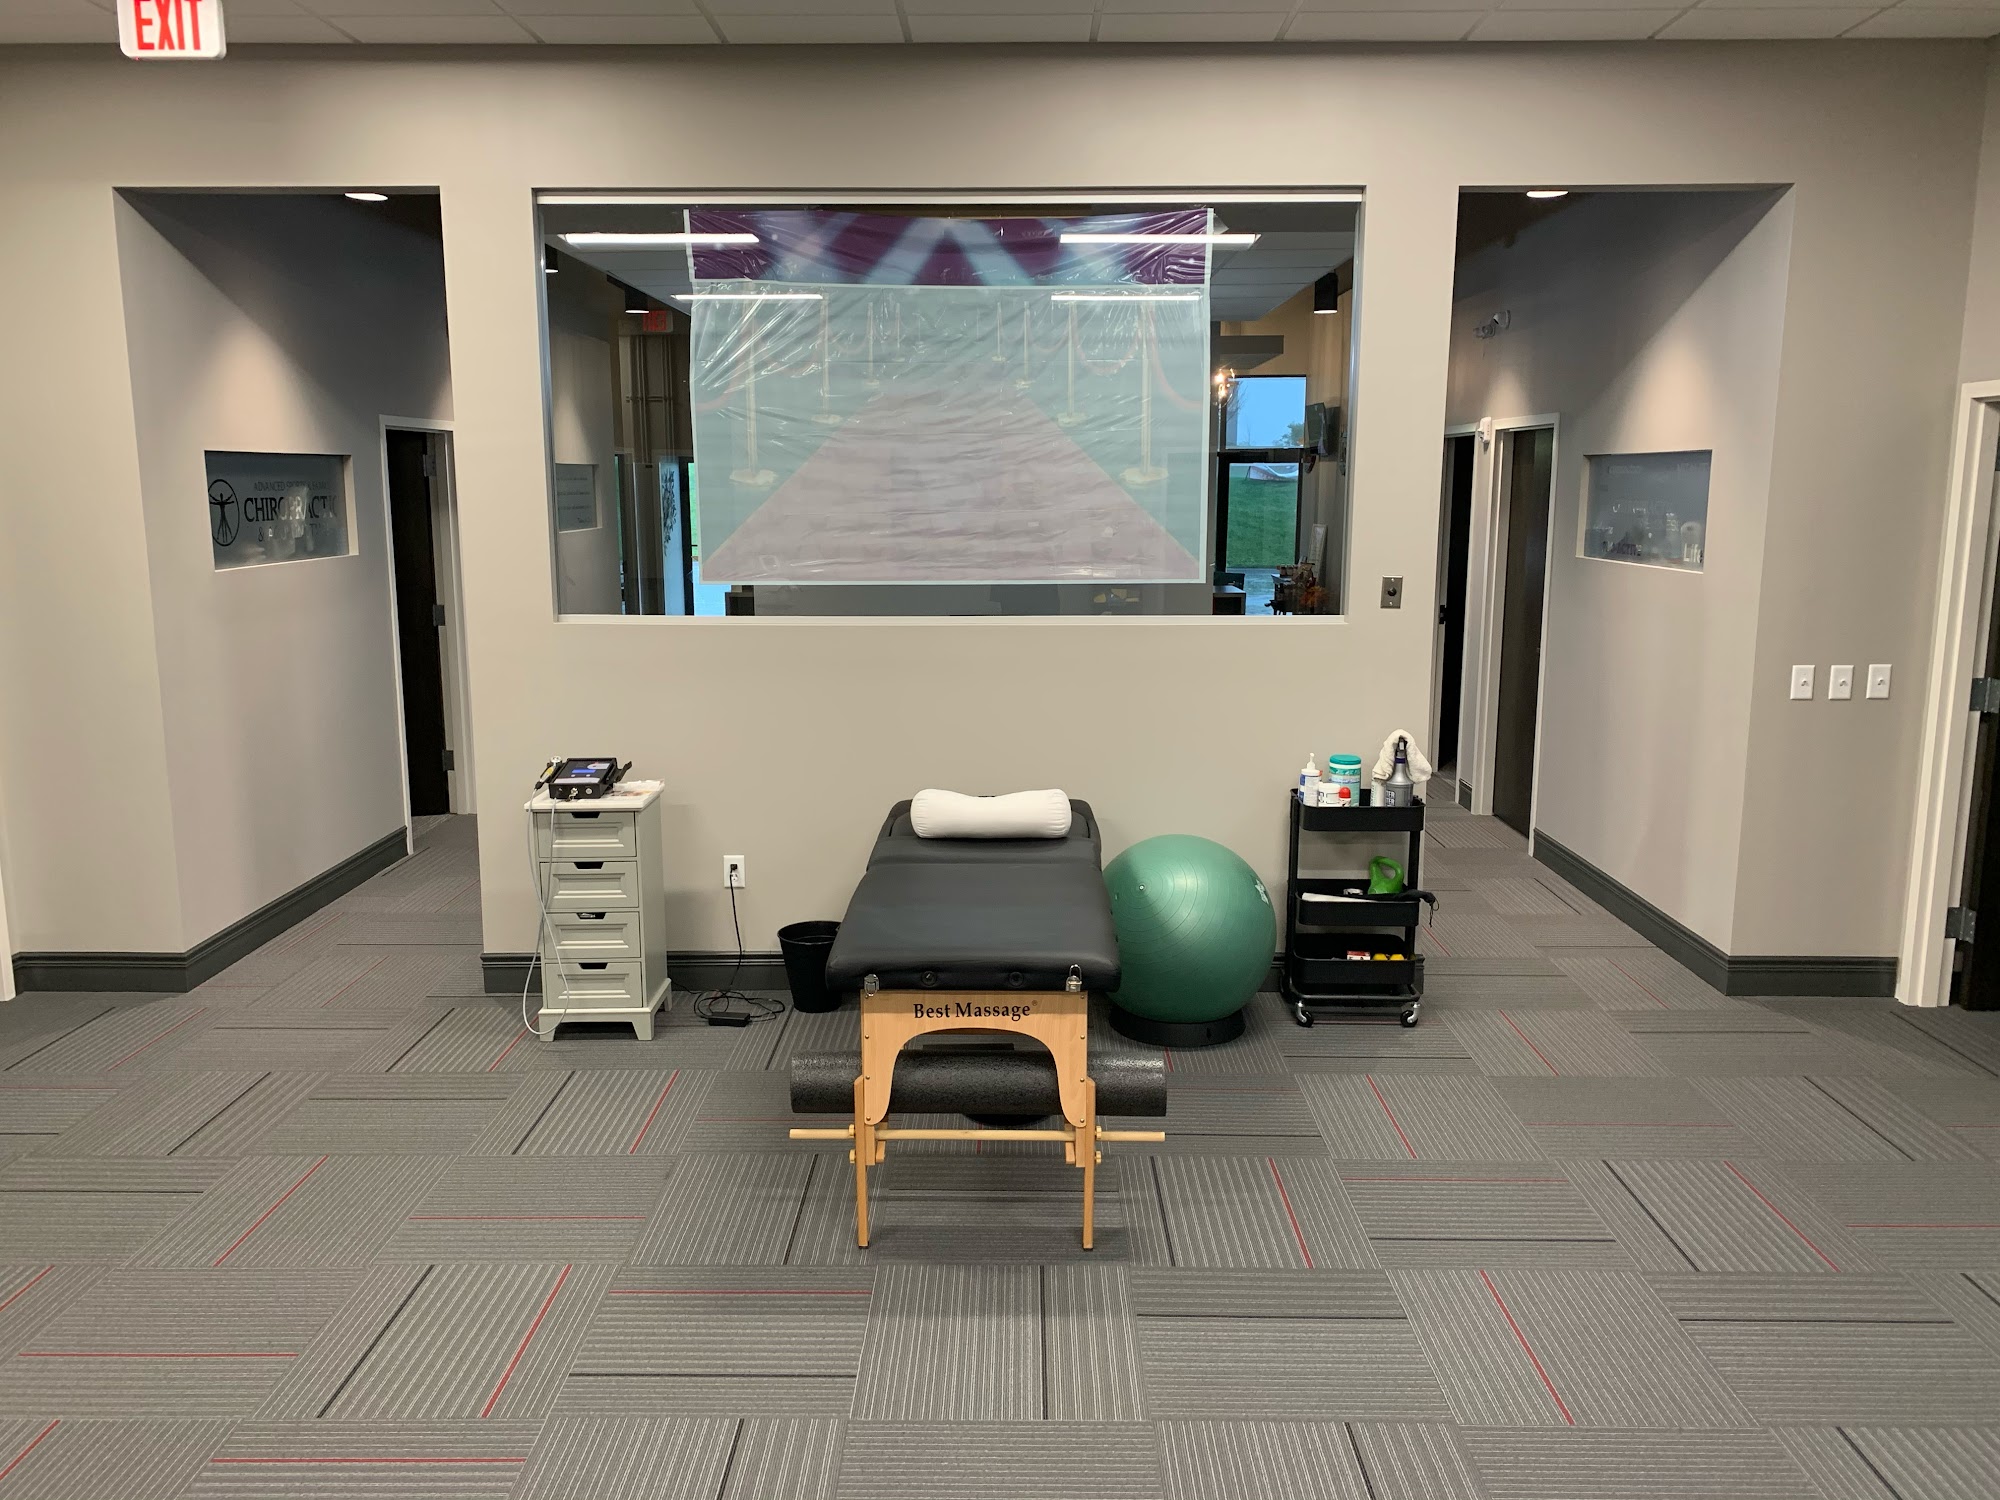 Advanced Sports & Family Chiropractic & Acupuncture: Olathe Location